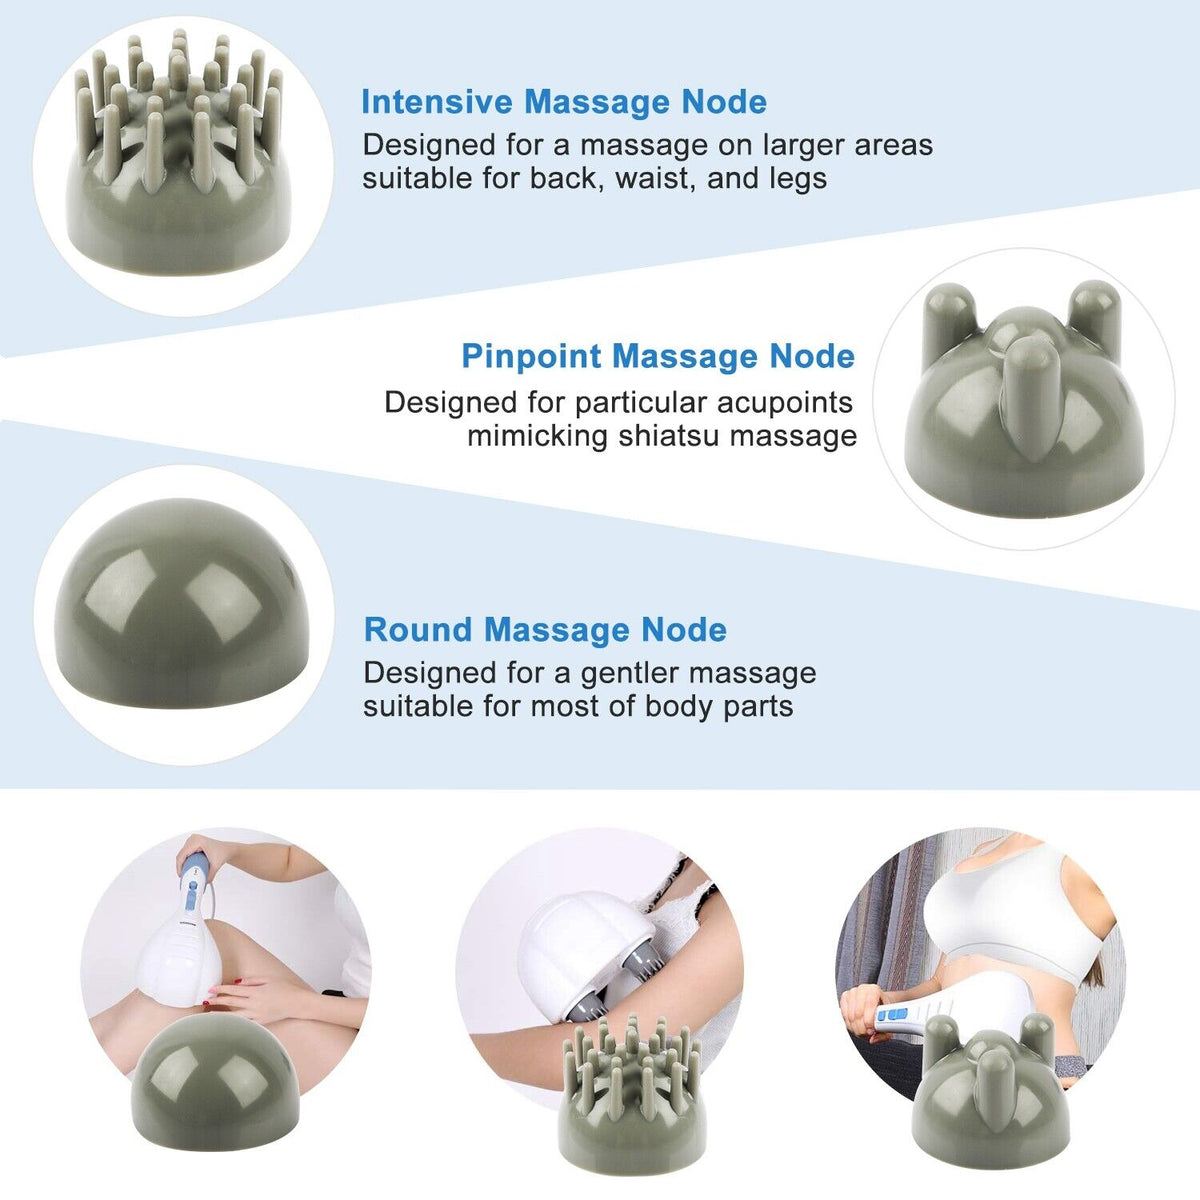 Handheld Electric Massager for Back and Neck